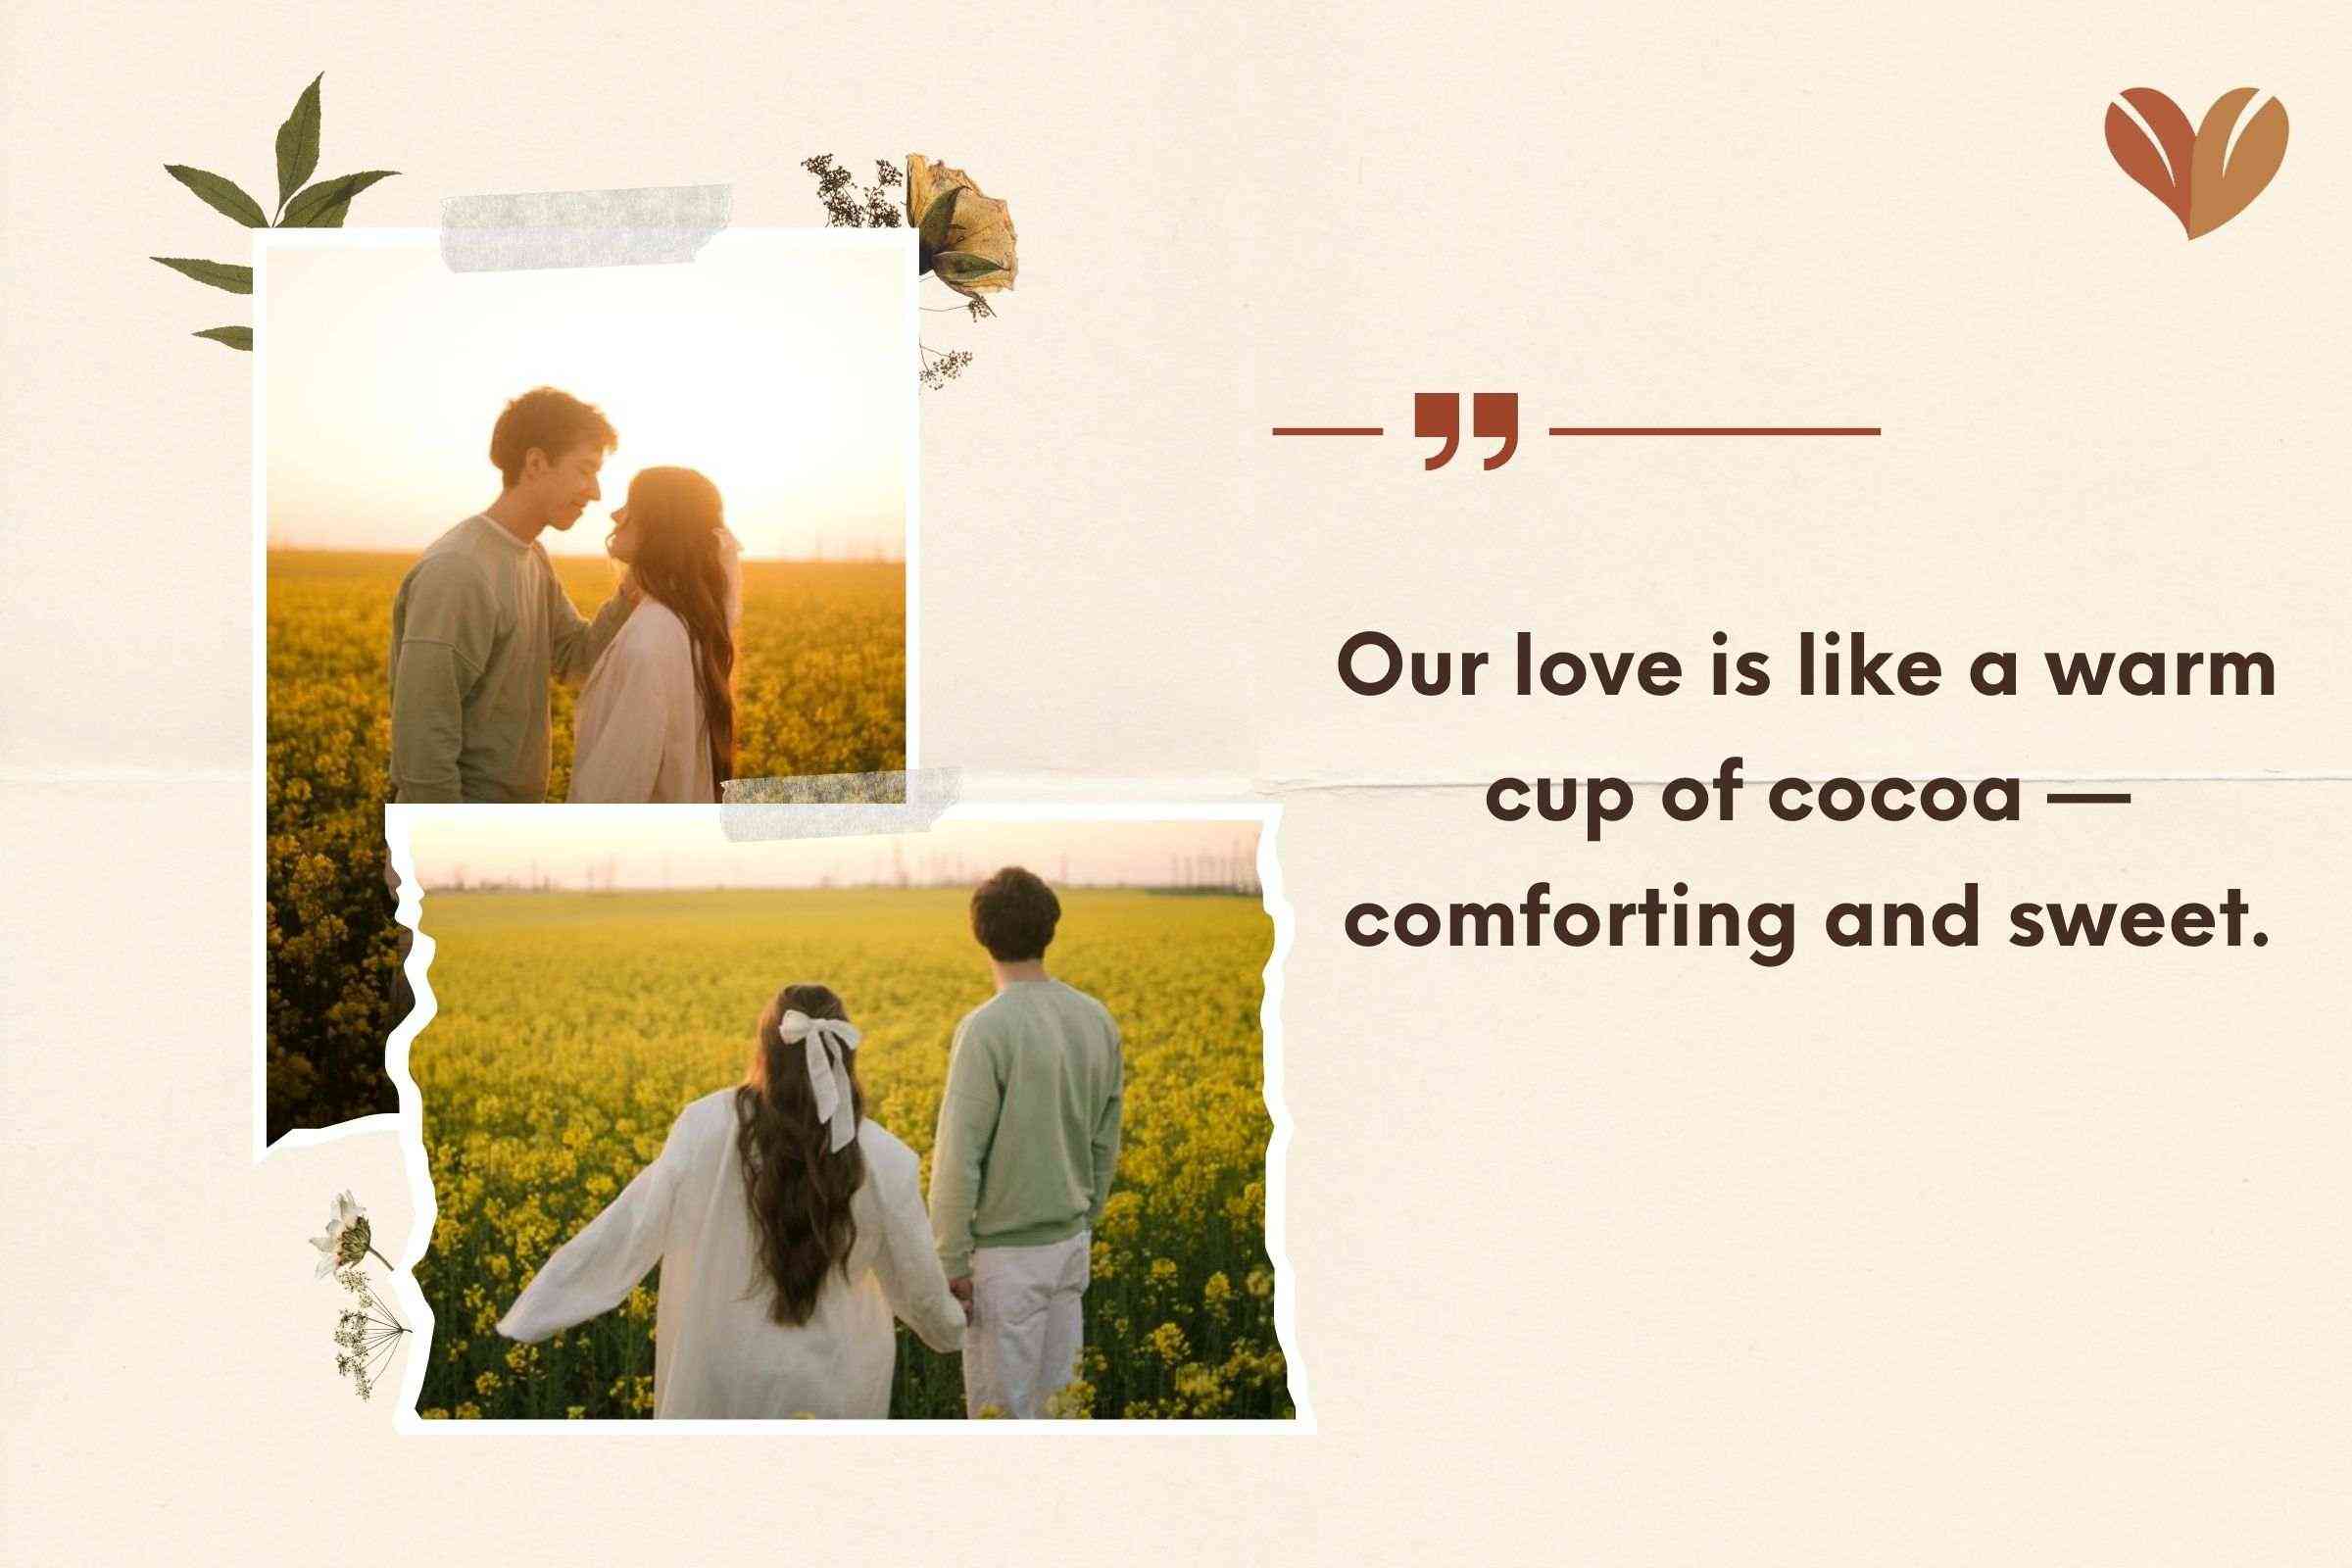 Our love is like a warm cup of cocoa —comforting and sweet.